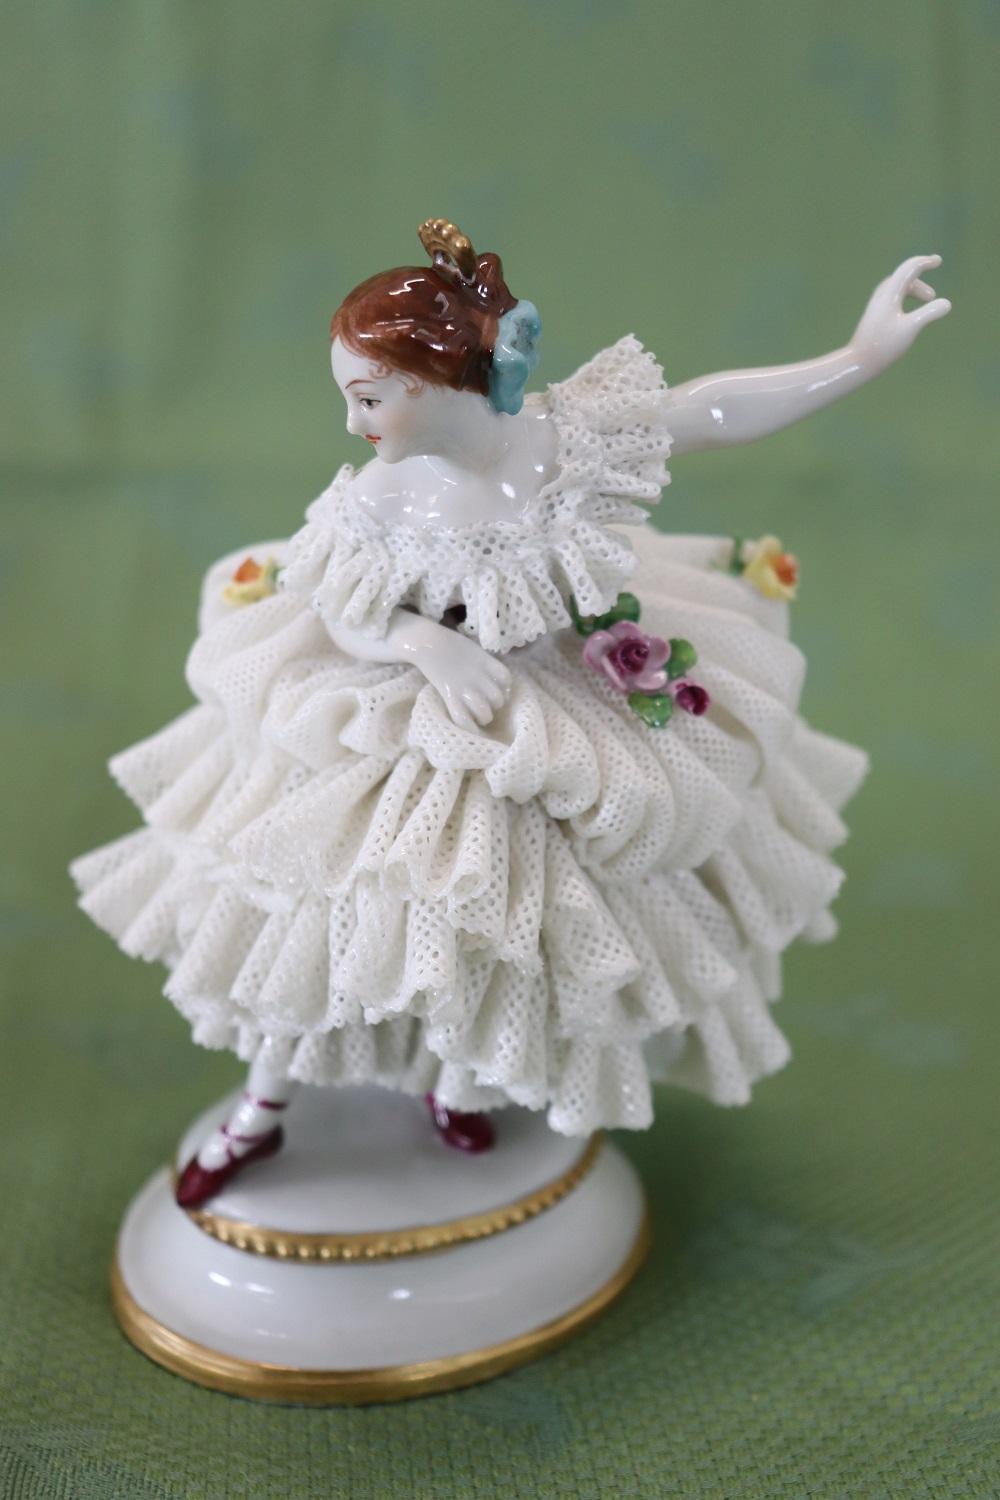 Late 19th Century 19th Century Italian Antique Porcelain Sculpture by Capodimonte For Sale